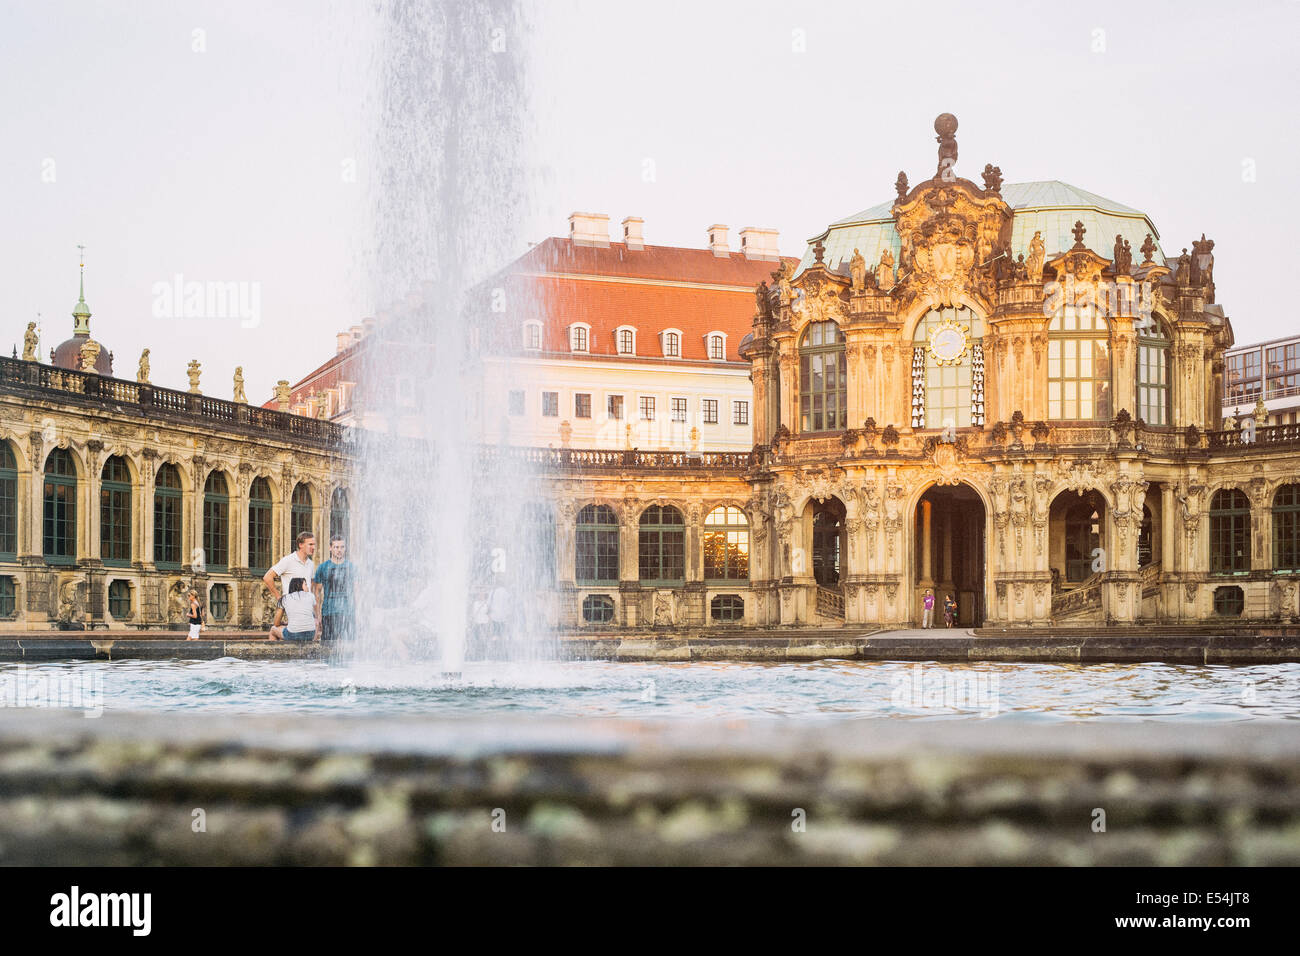 Zwinger in Dresden of Germany, one of the tourist attractions. Stock Photo